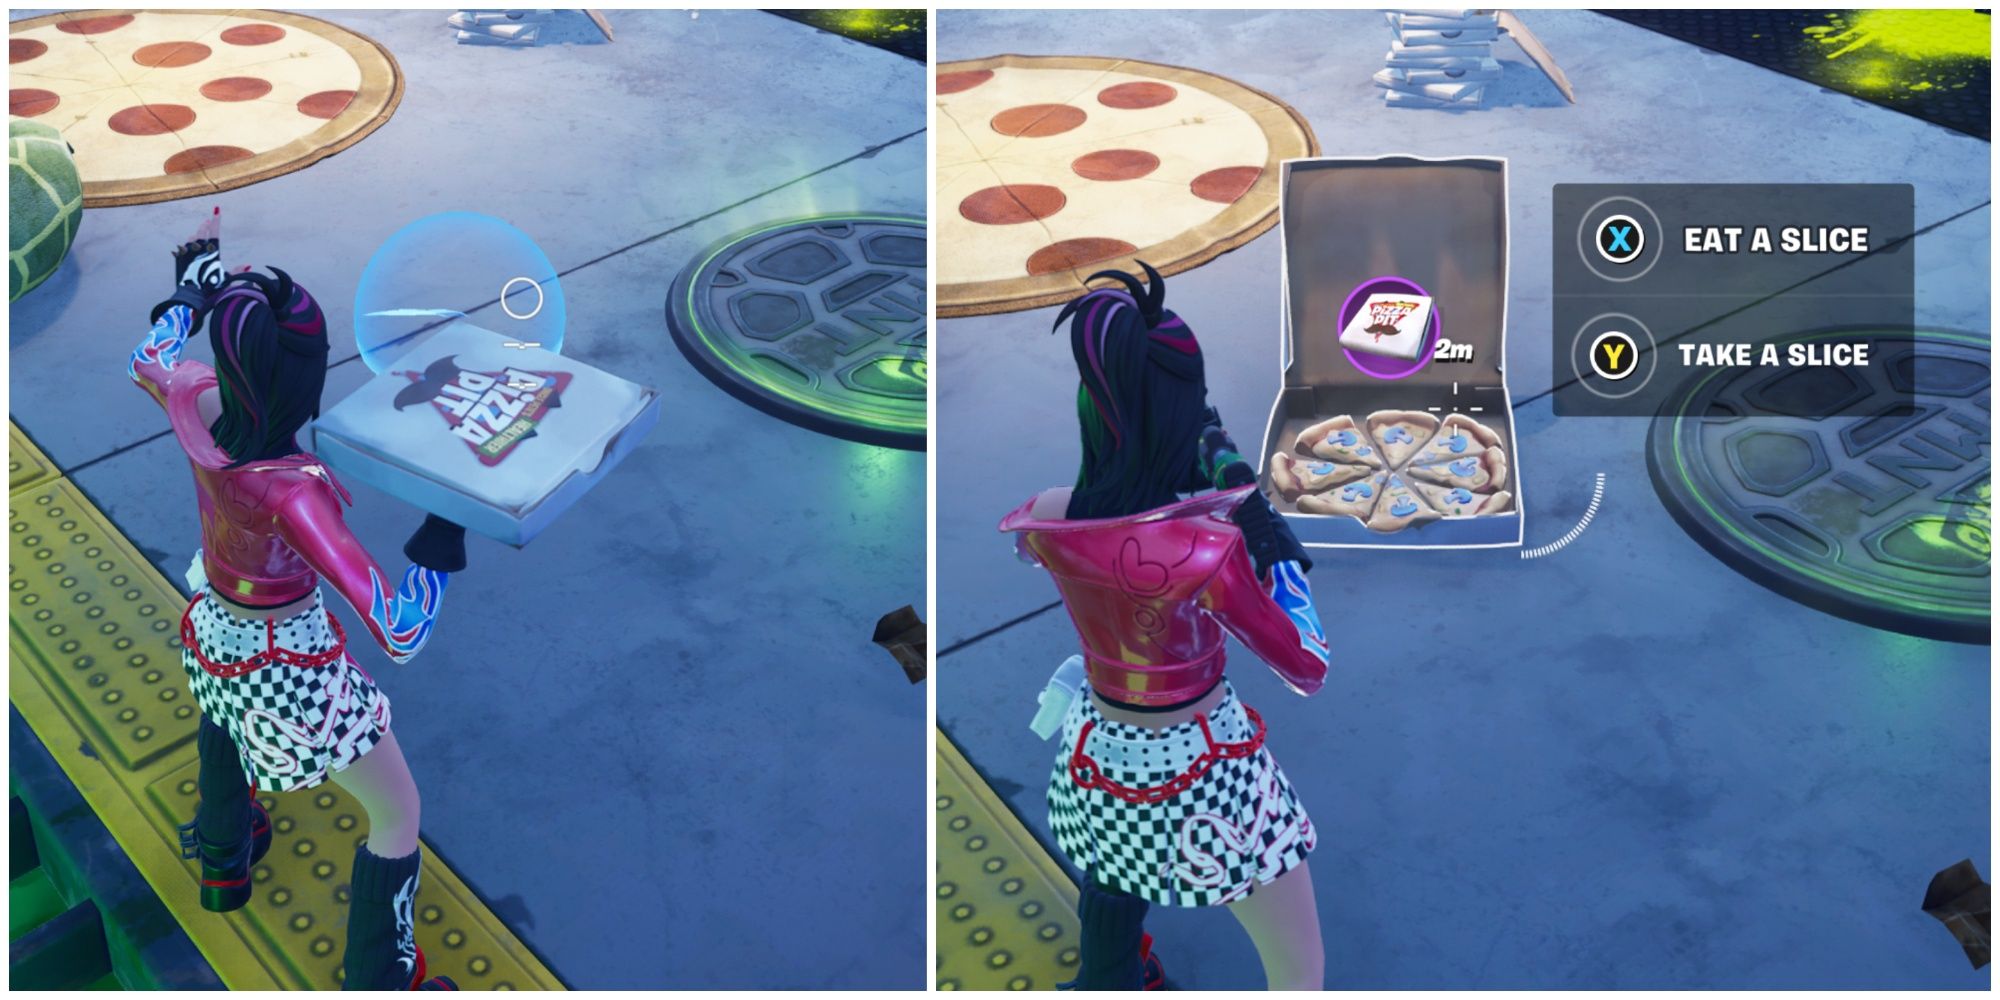 throwing pizza party item on the ground